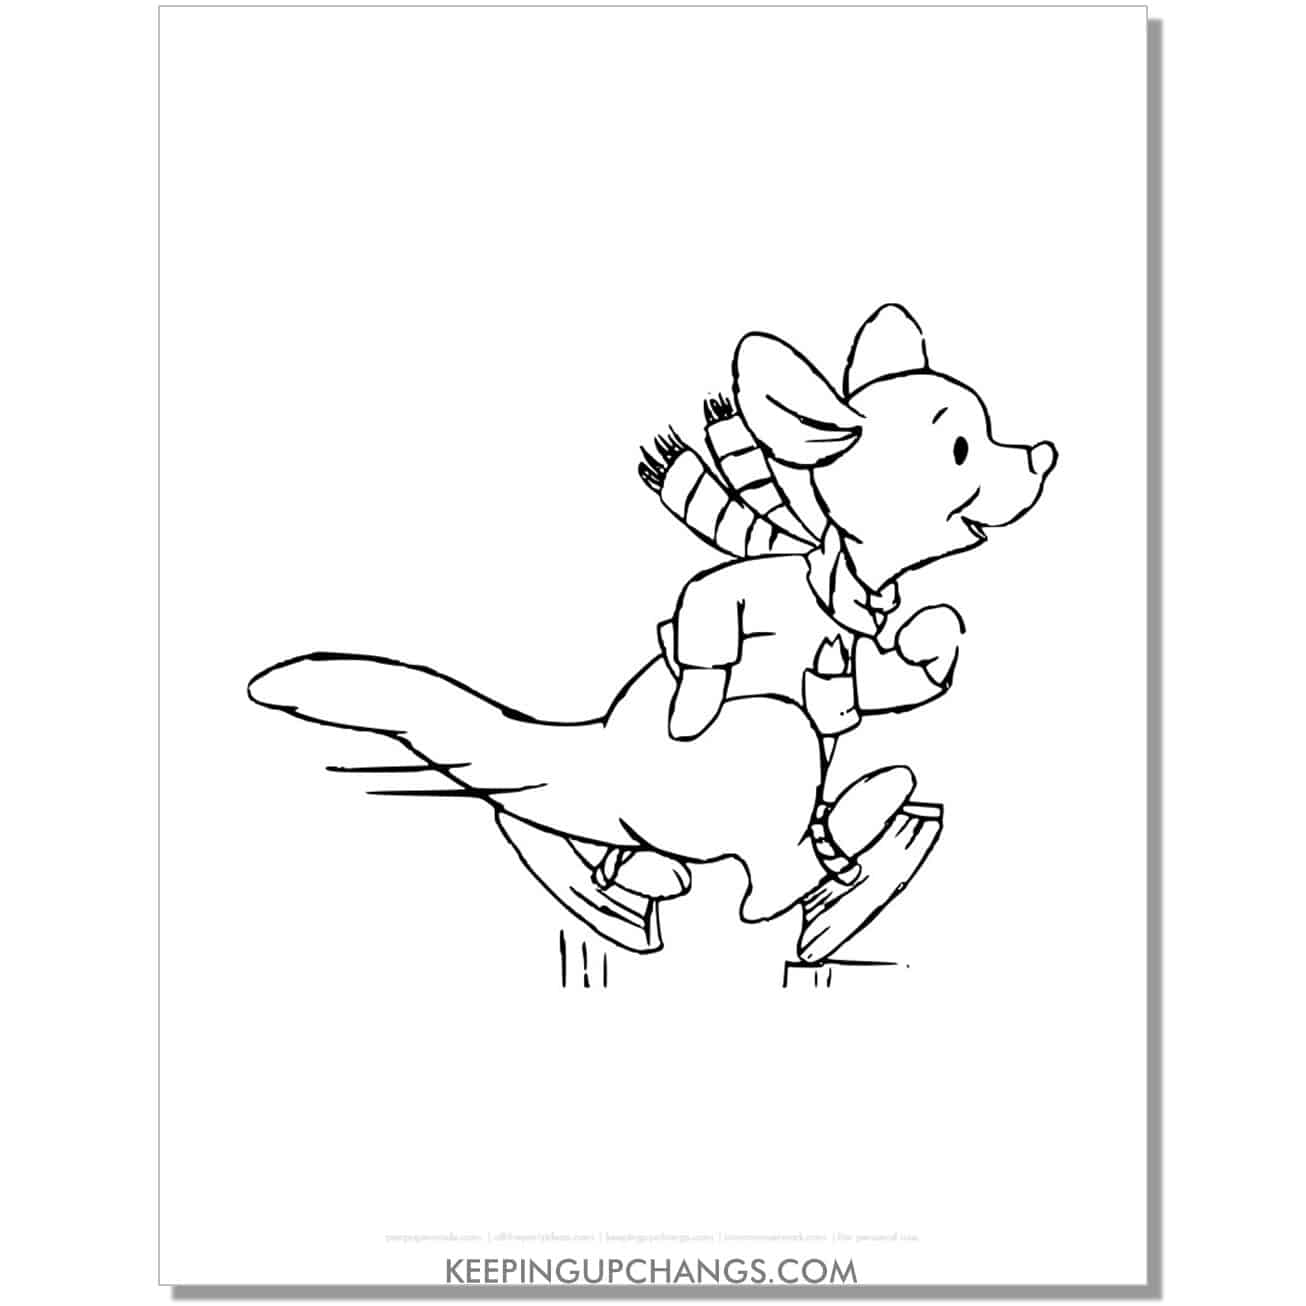 roo on ice skates coloring page, sheet.